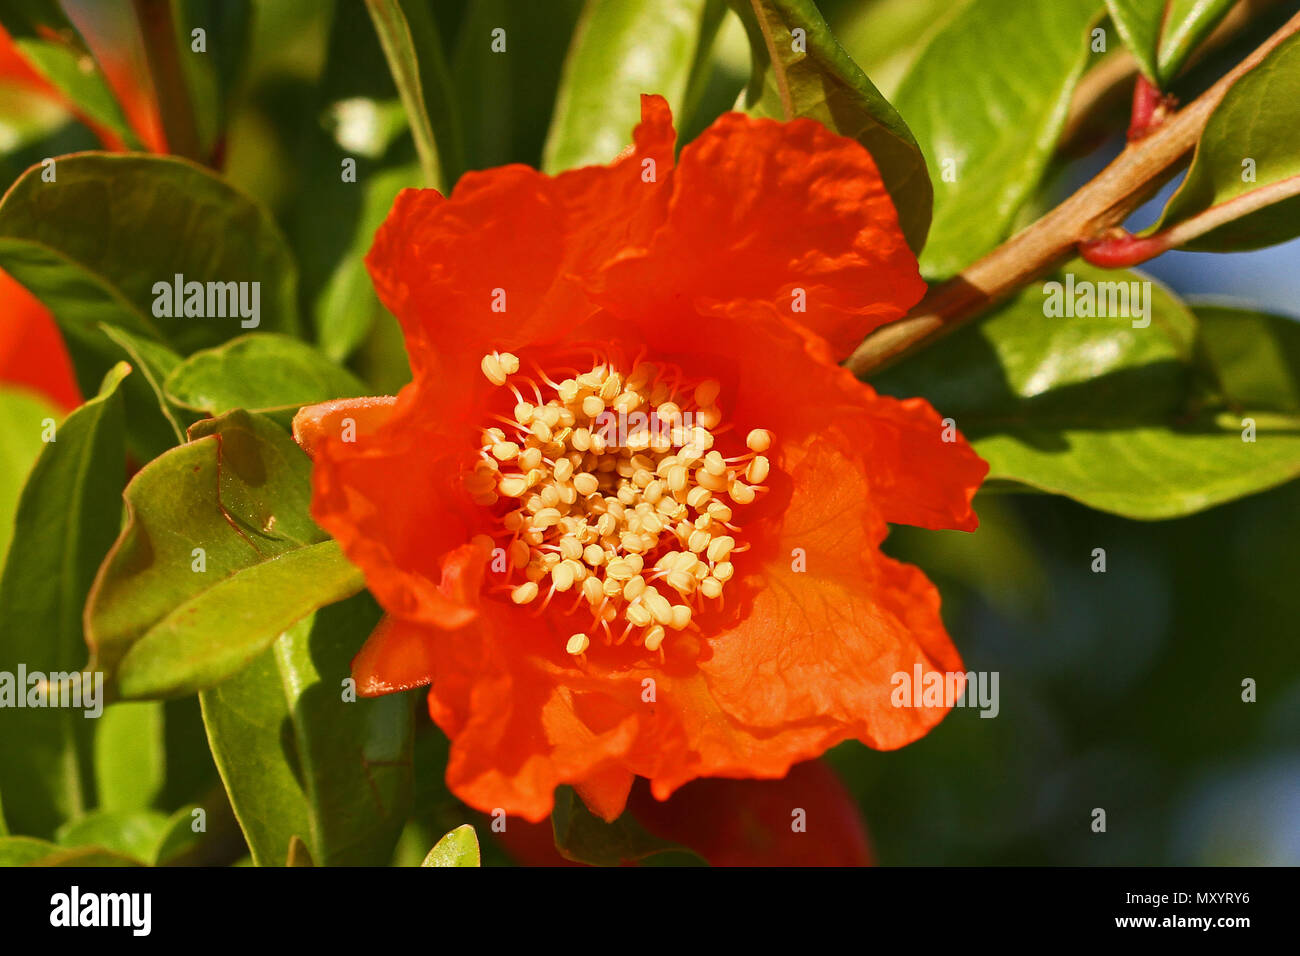 red pomegranate or punica flower or blossom with yellow stamens and unopened flowers in the background melograno in springtime in Italy close up Stock Photo